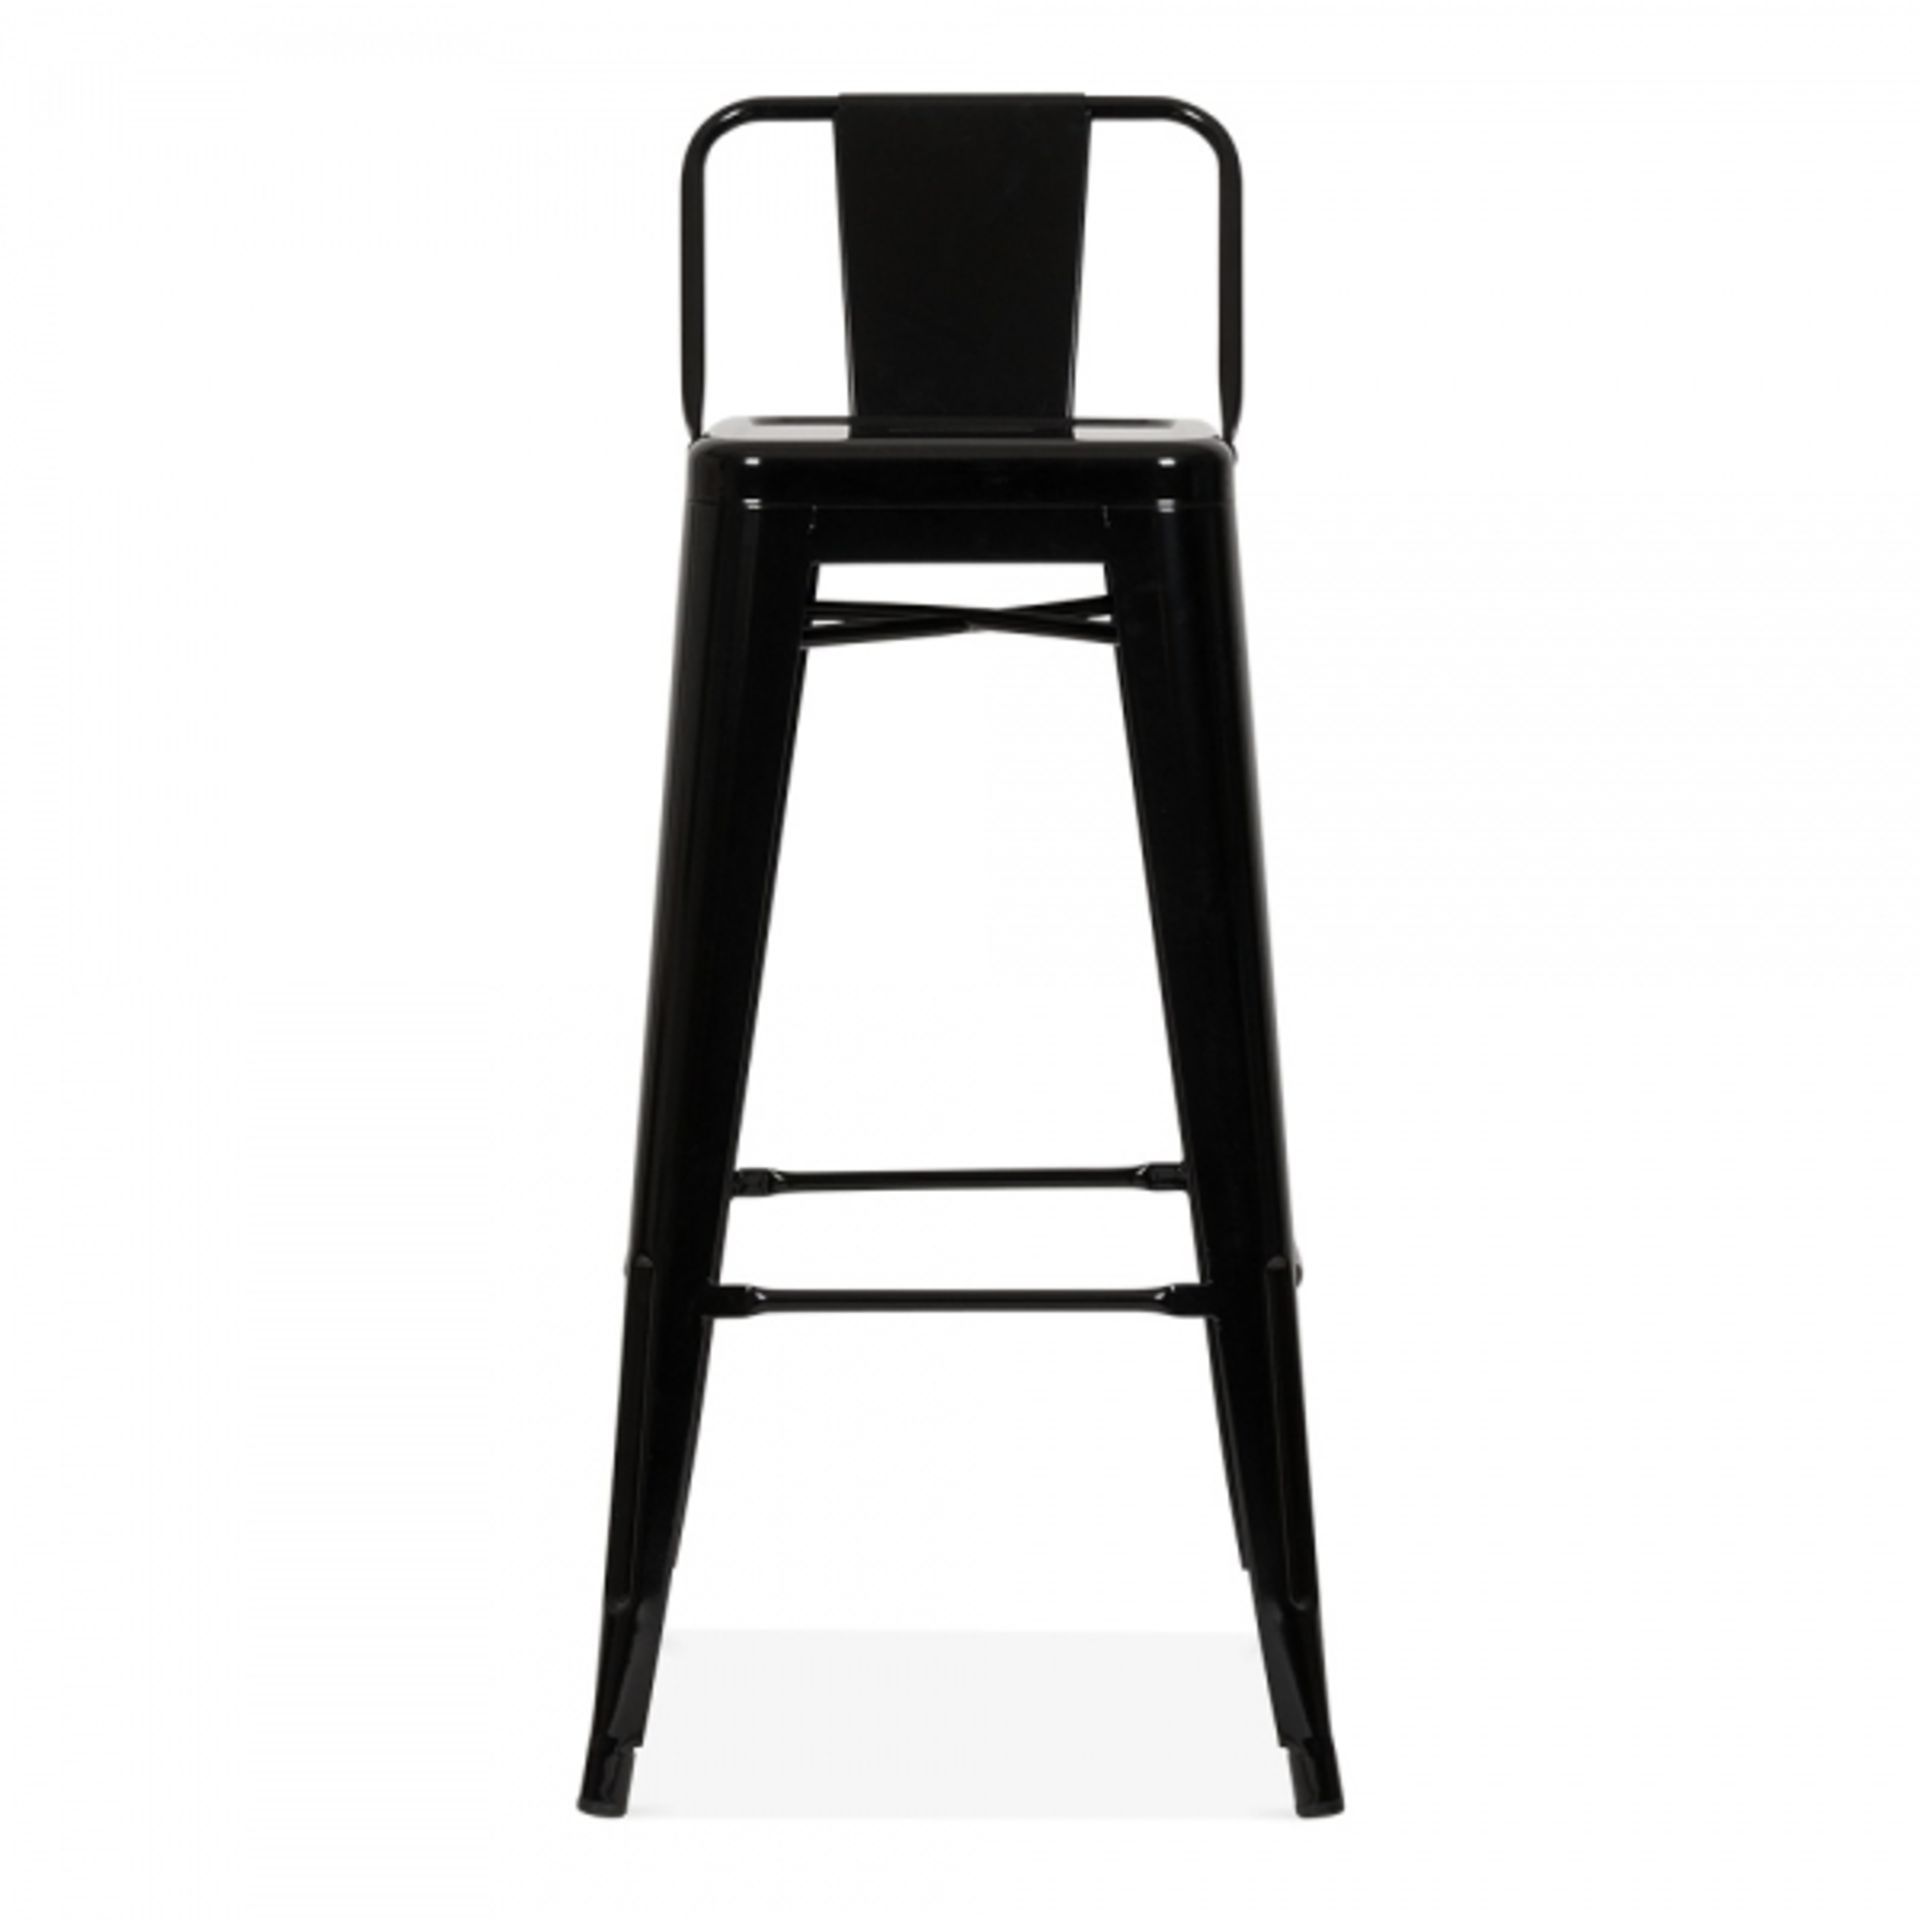 1 x Tolix Industrial Style Outdoor Bar Table and Bar Stool Set in Black - Includes 1 x Bar Table and - Image 8 of 9